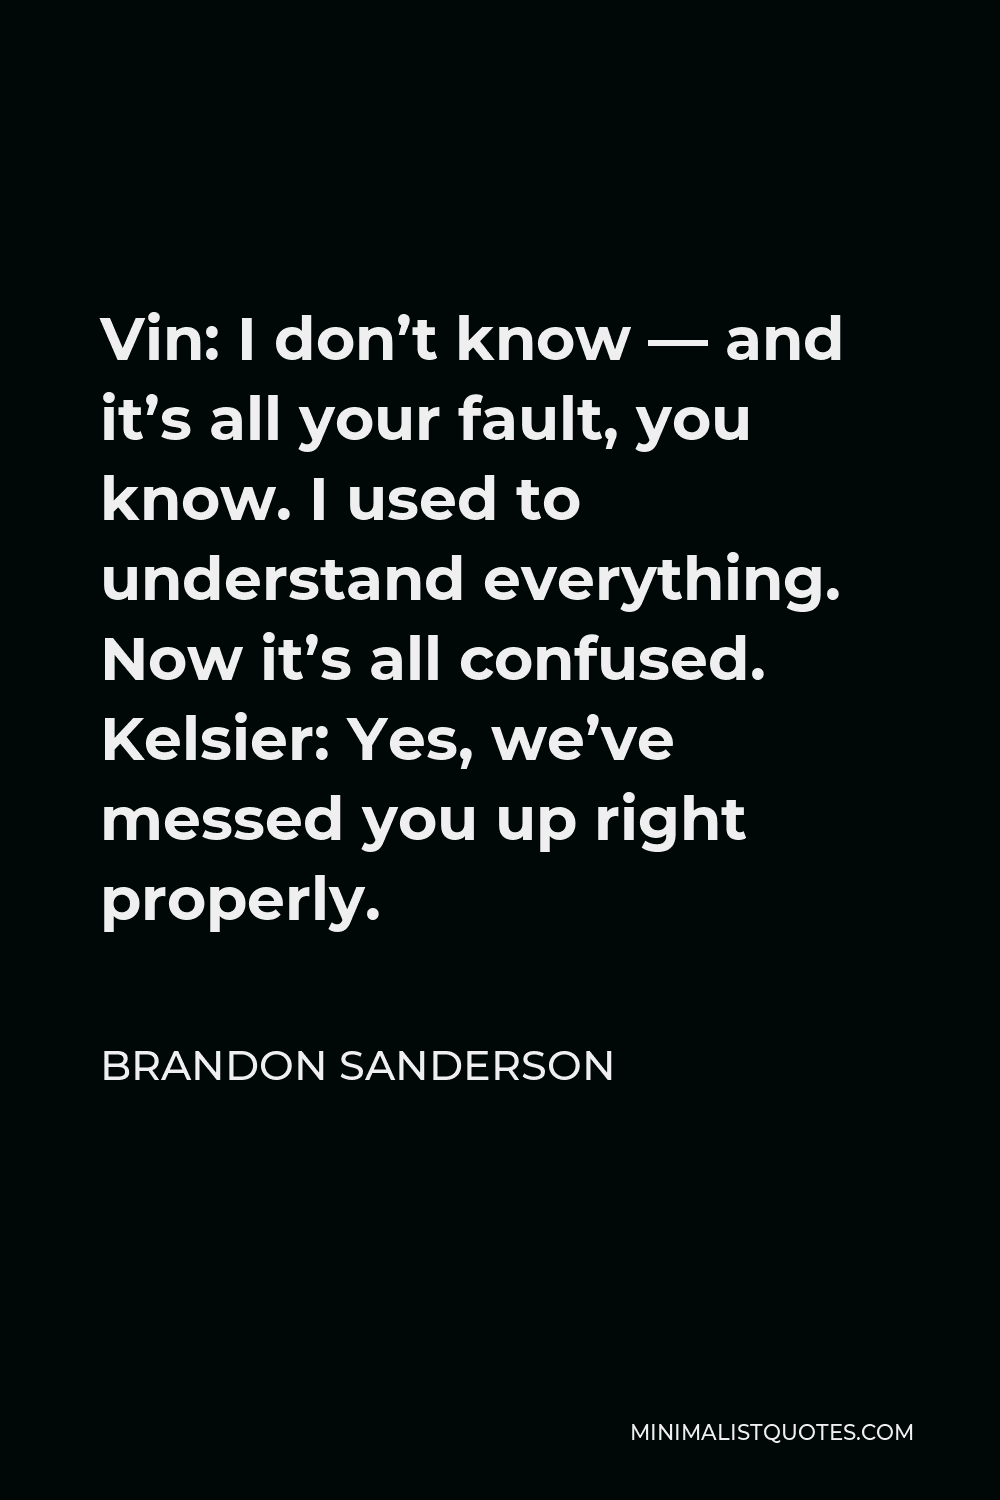 Brandon Sanderson Quote - Vin: I don’t know — and it’s all your fault, you know. I used to understand everything. Now it’s all confused. Kelsier: Yes, we’ve messed you up right properly.